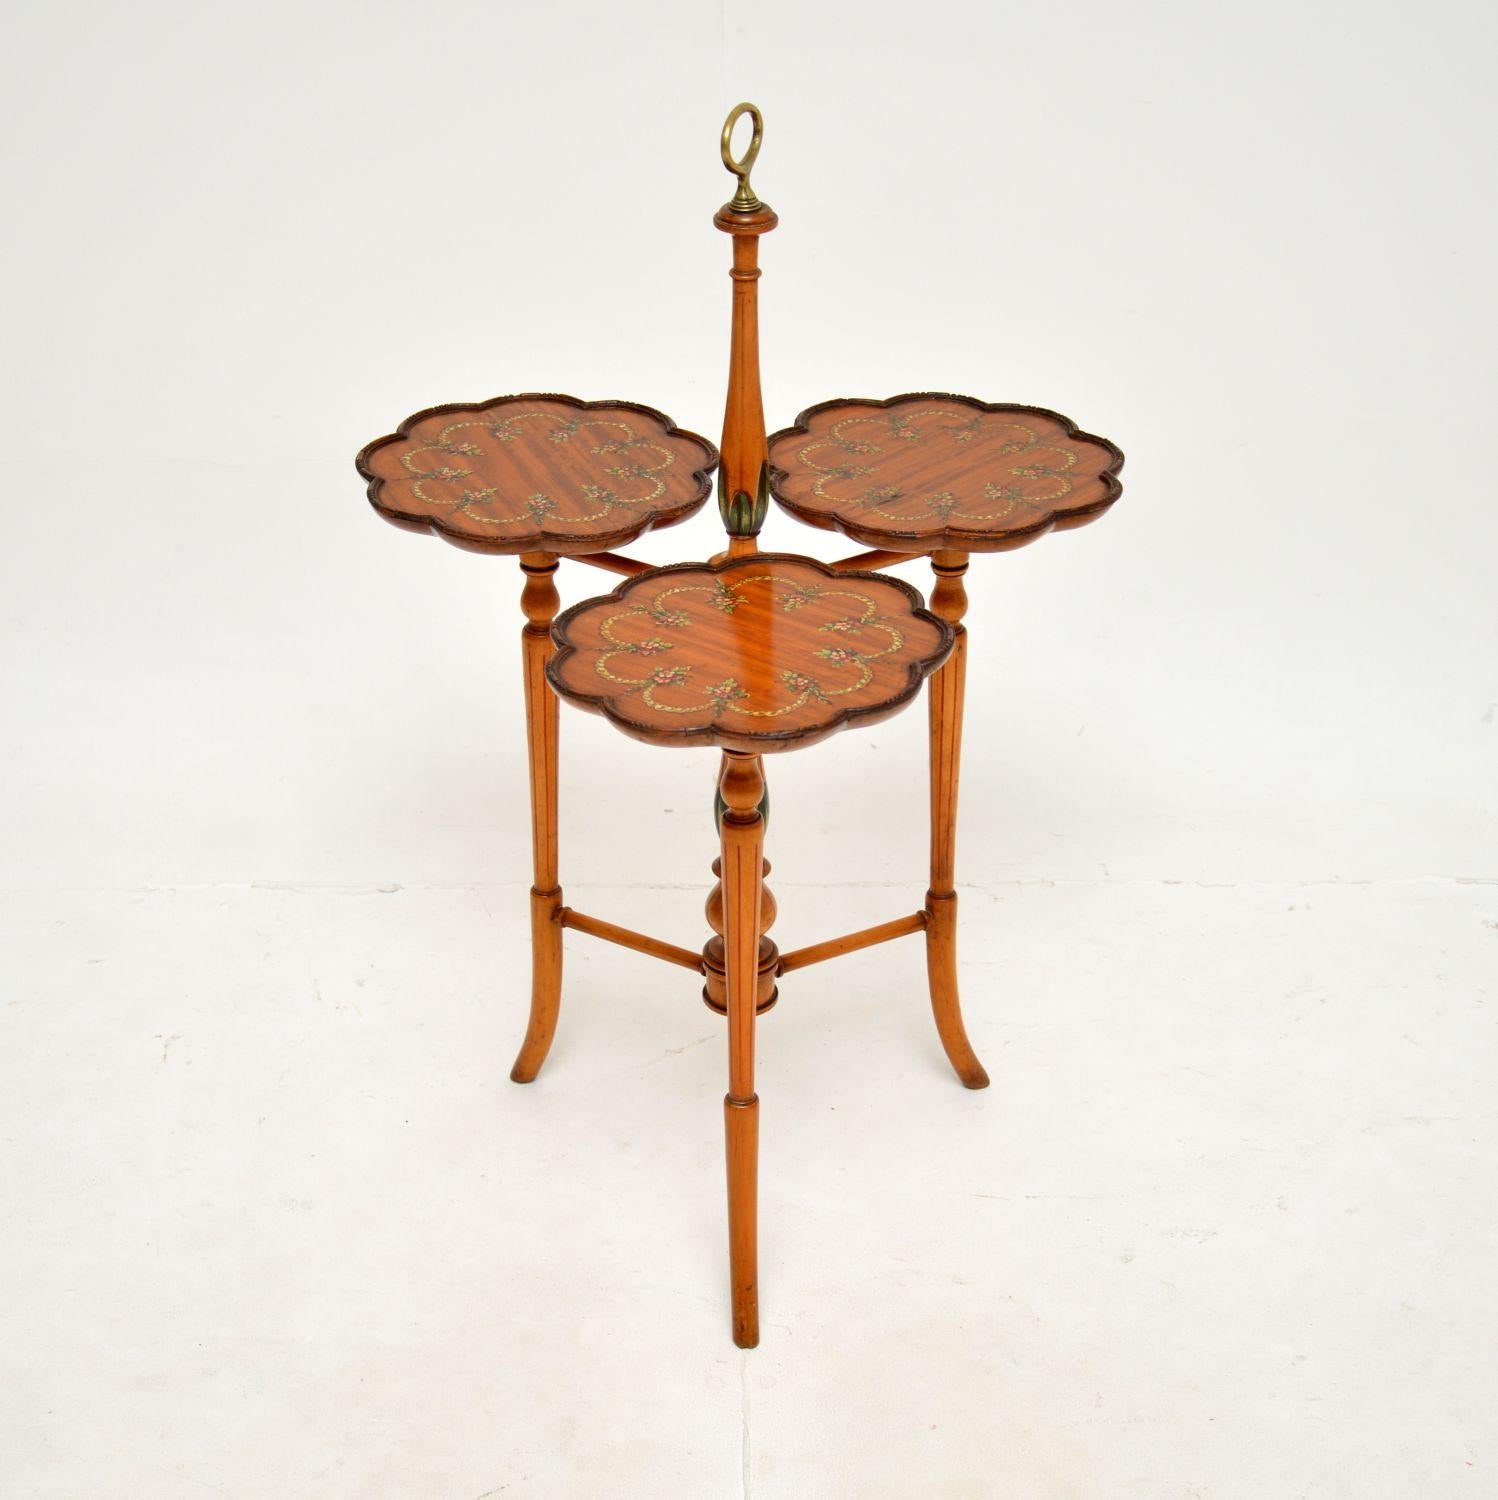 A beautiful and very decorative antique Edwardian painted satin wood cake stand / side table. This was made in England, it dates from around 1900-1910.

It has a gorgeous design, with a beautifully turned central column supporting three individual